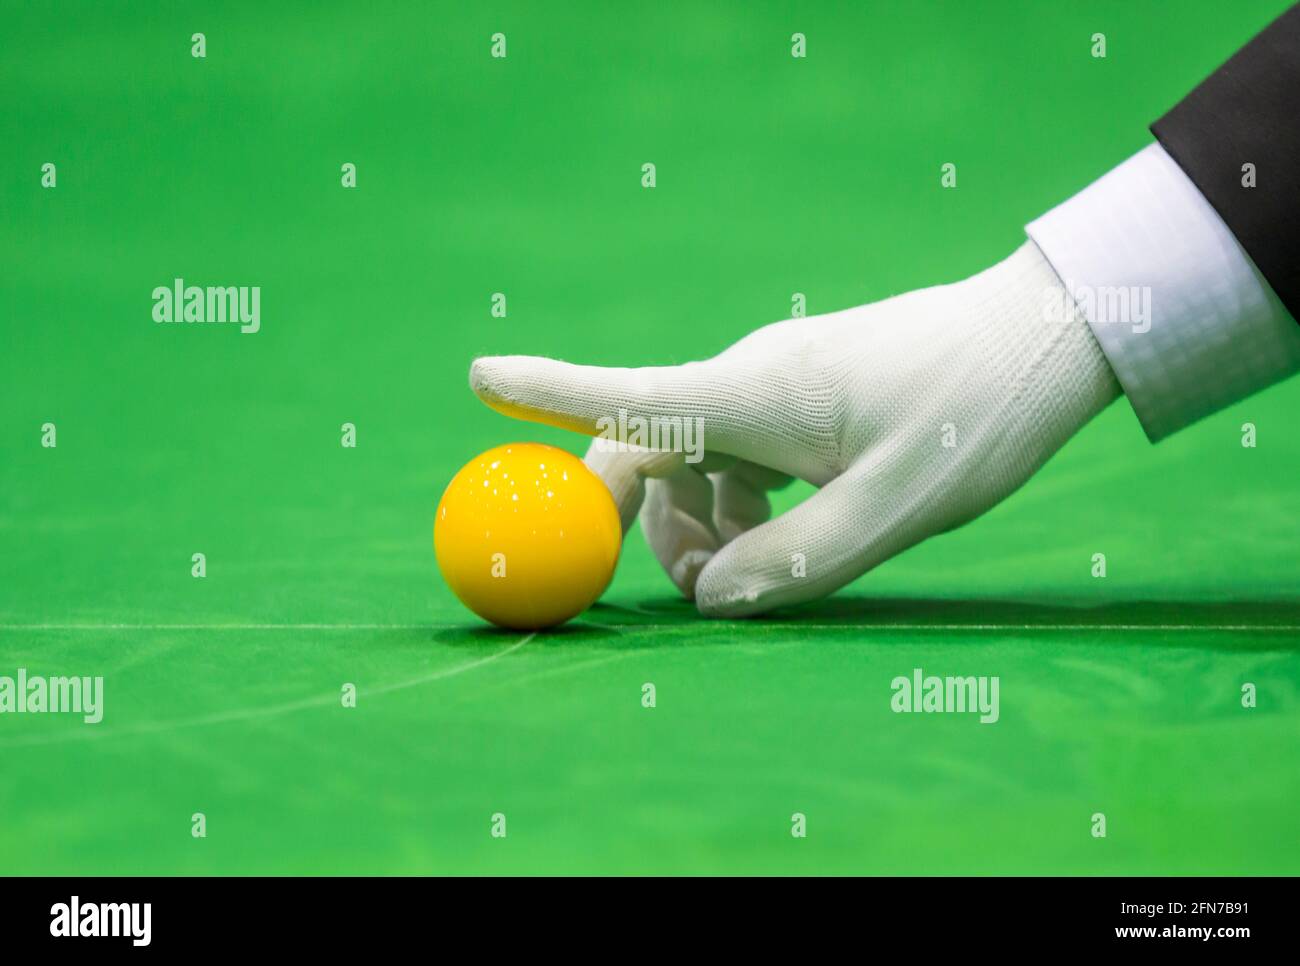 Snooker referee set up ball for new game Stock Photo - Alamy